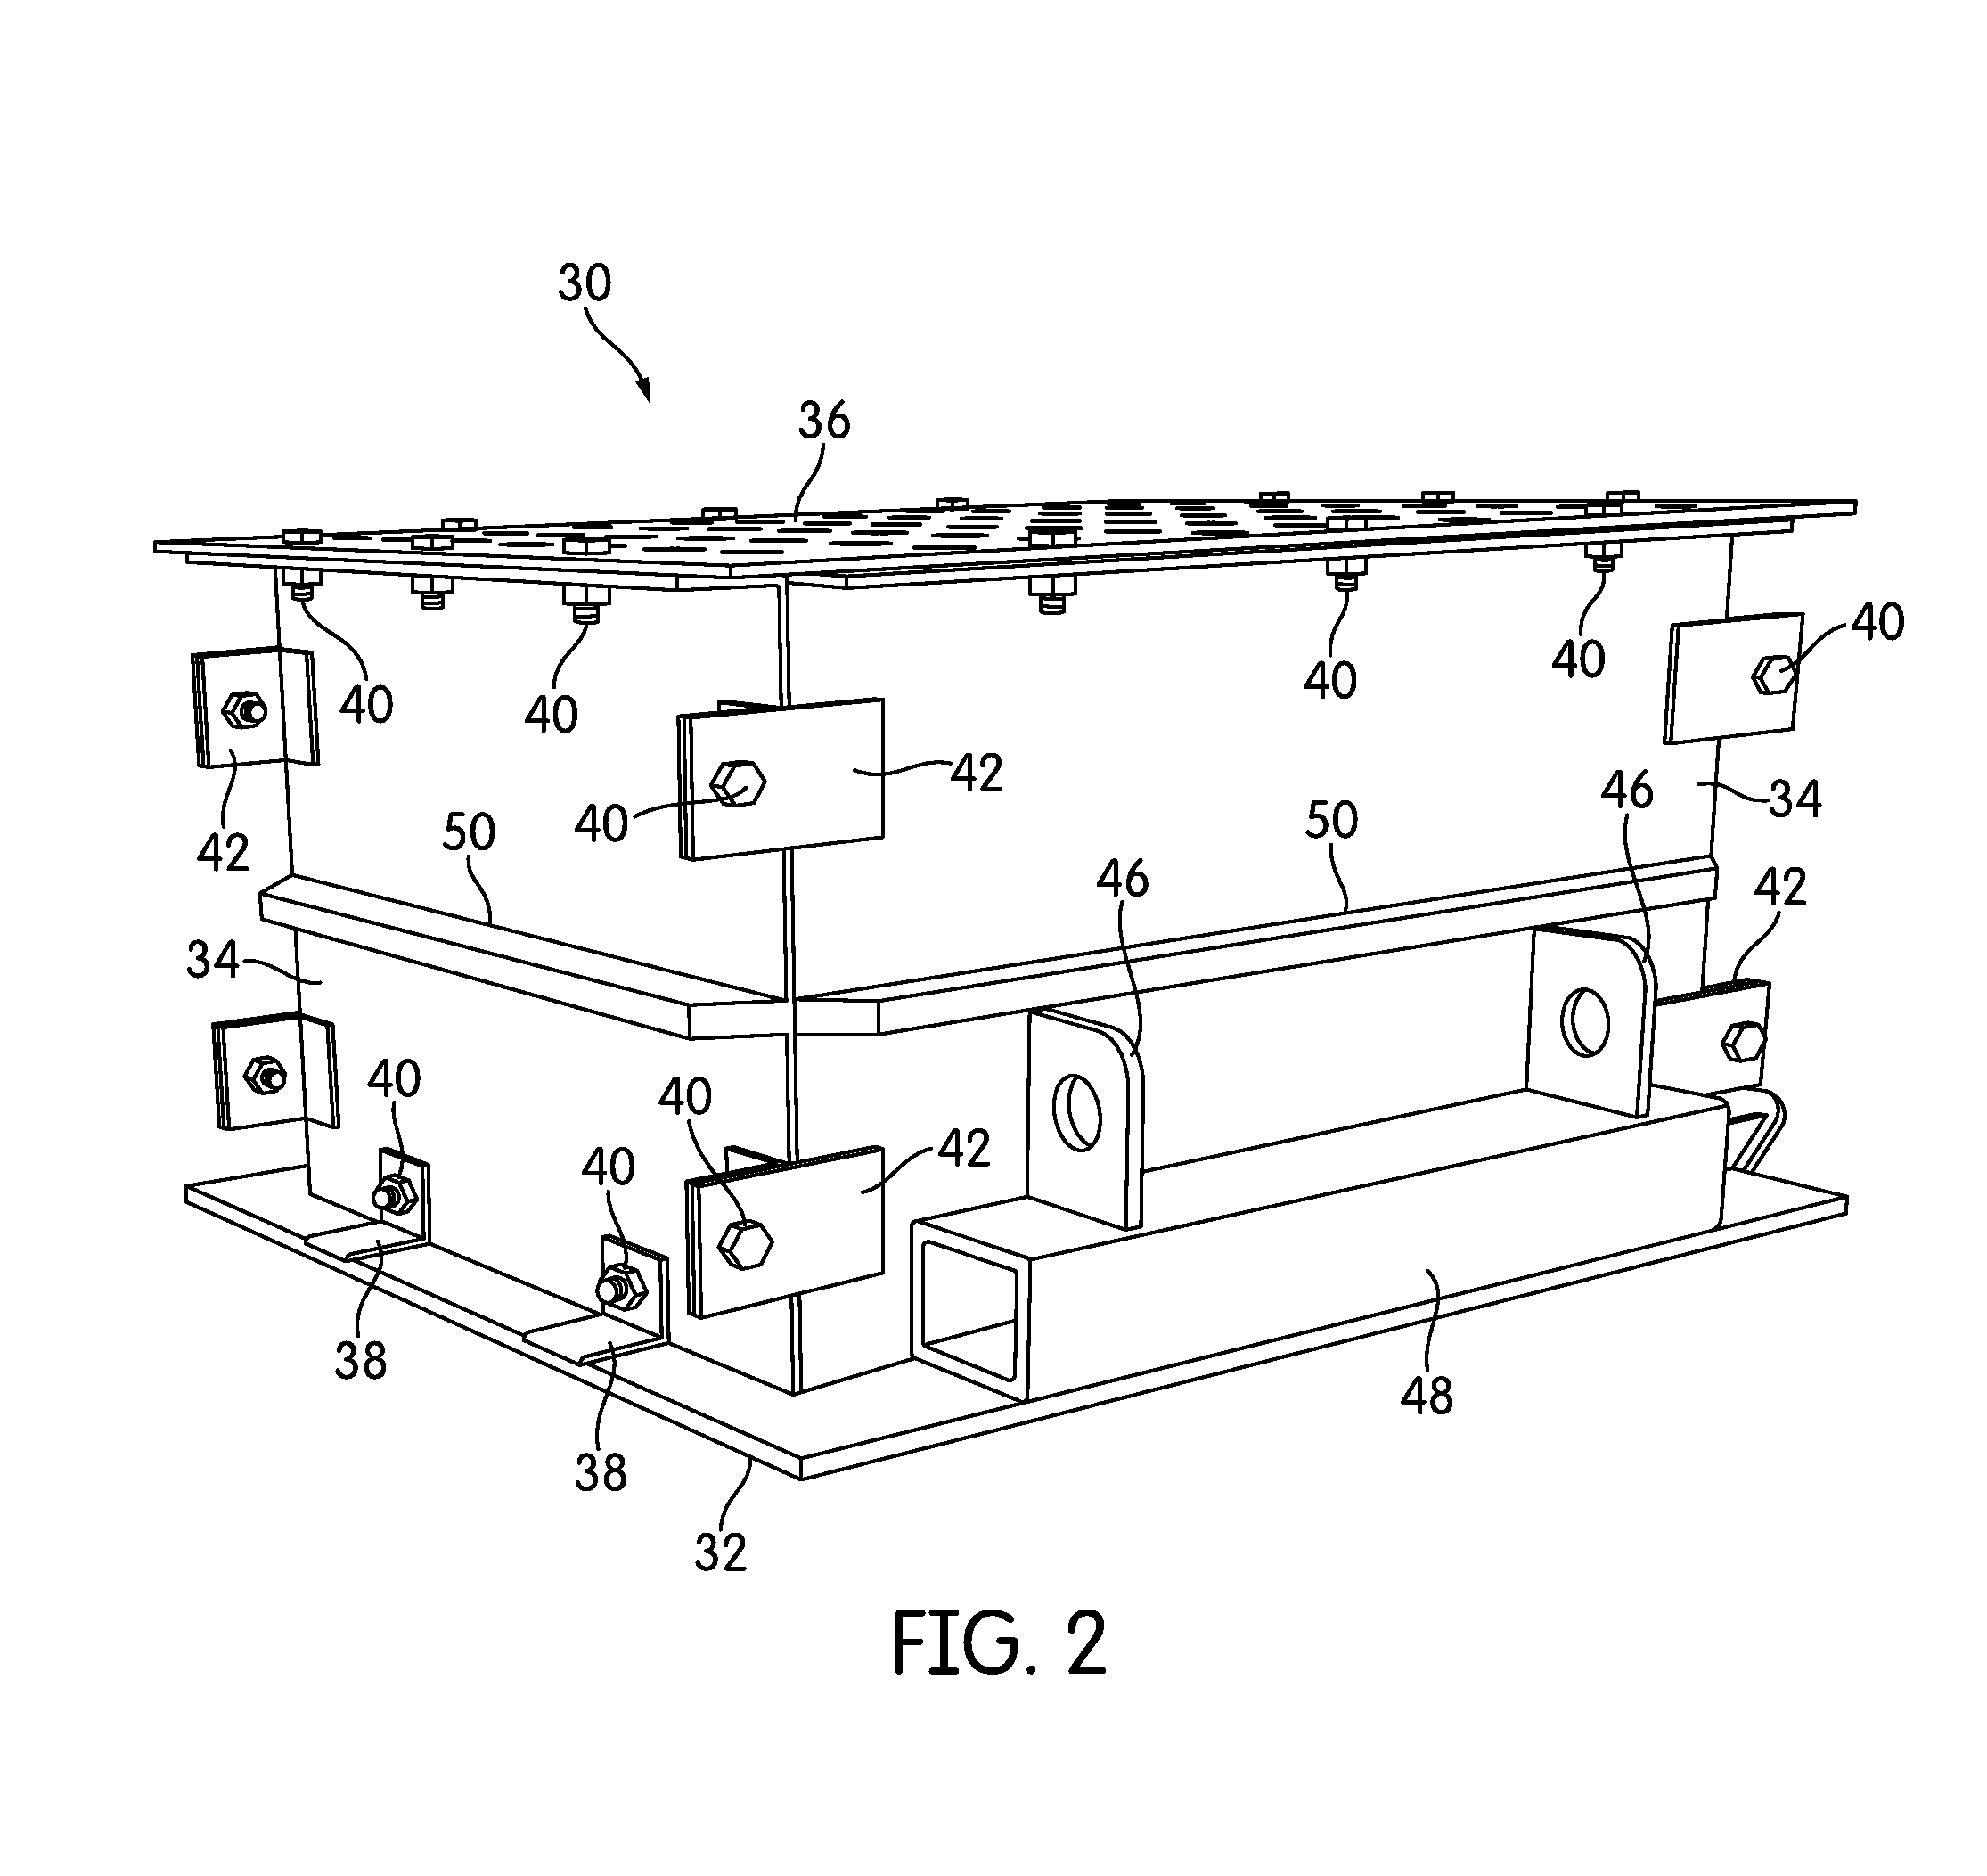 Method and apparatus for testing coal coking properties